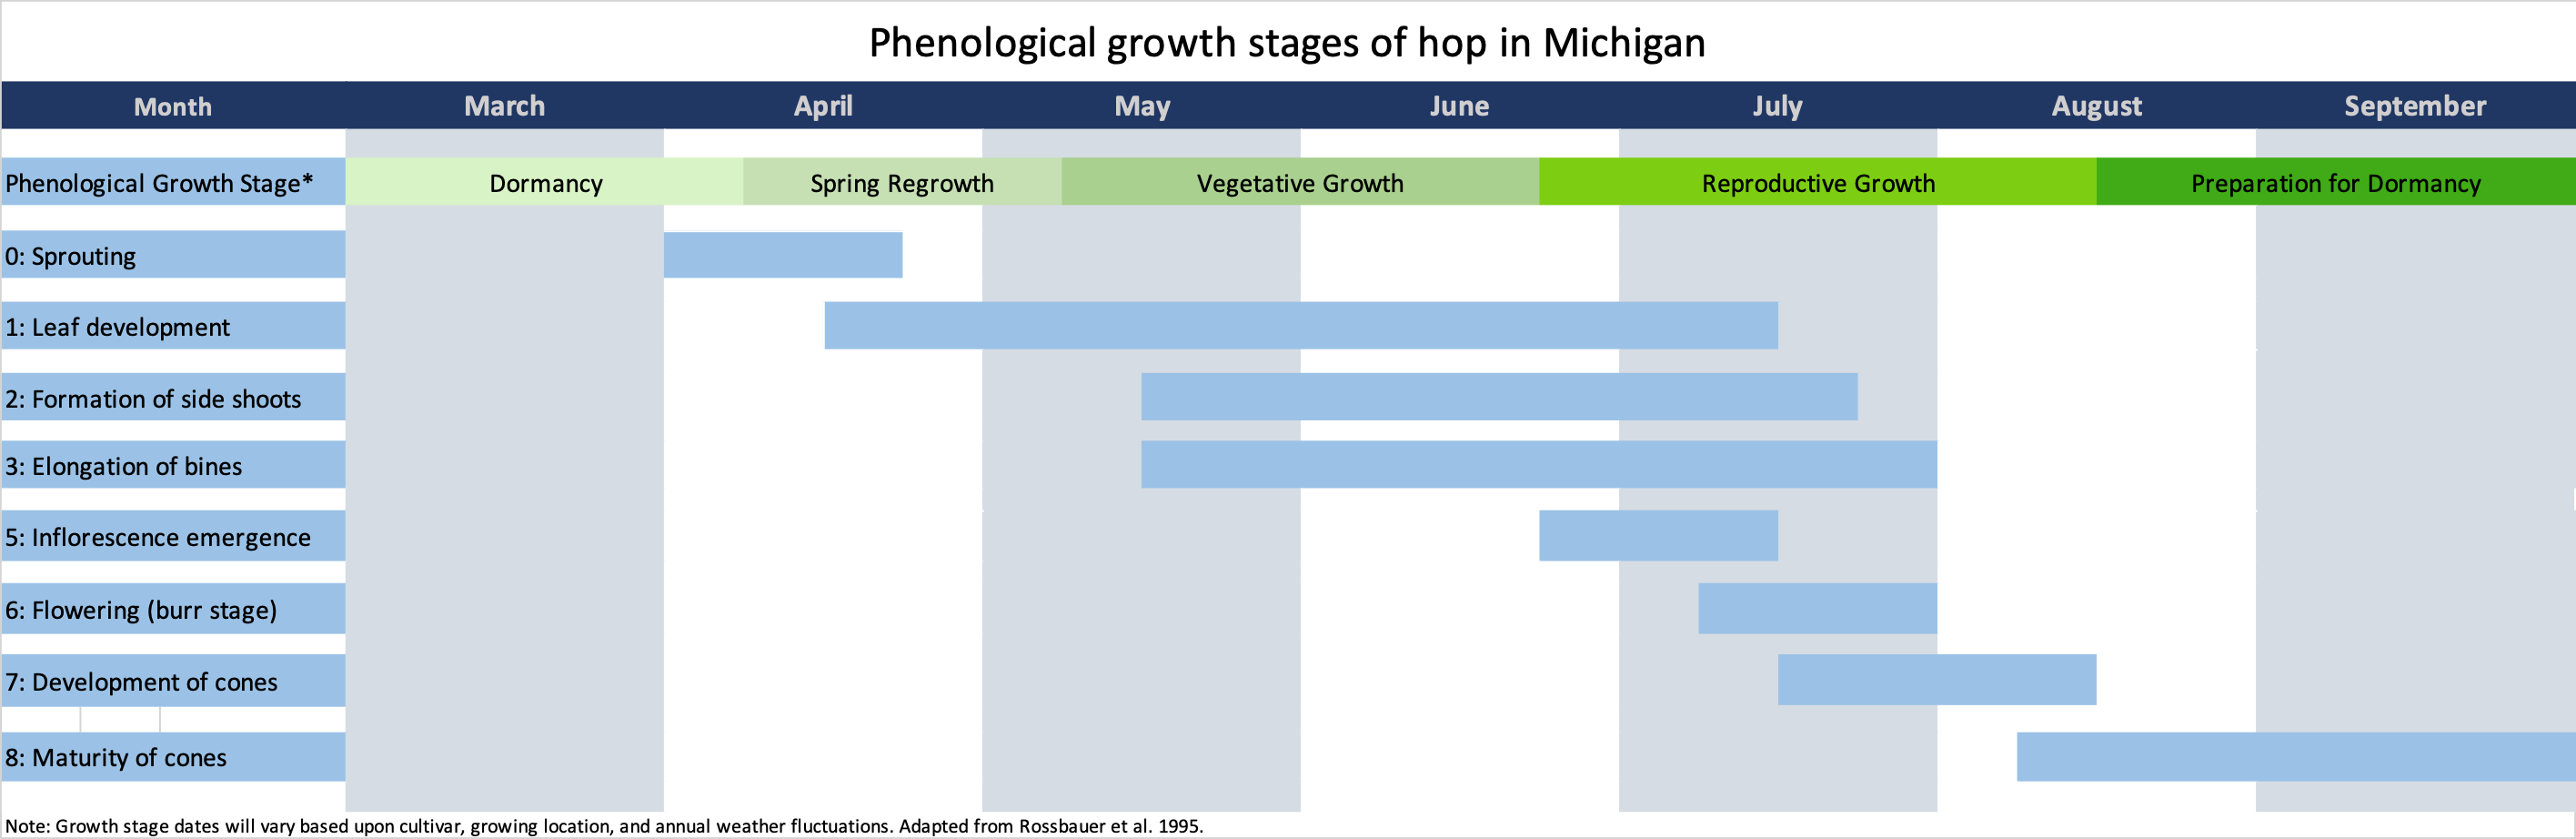 phenological growth stages